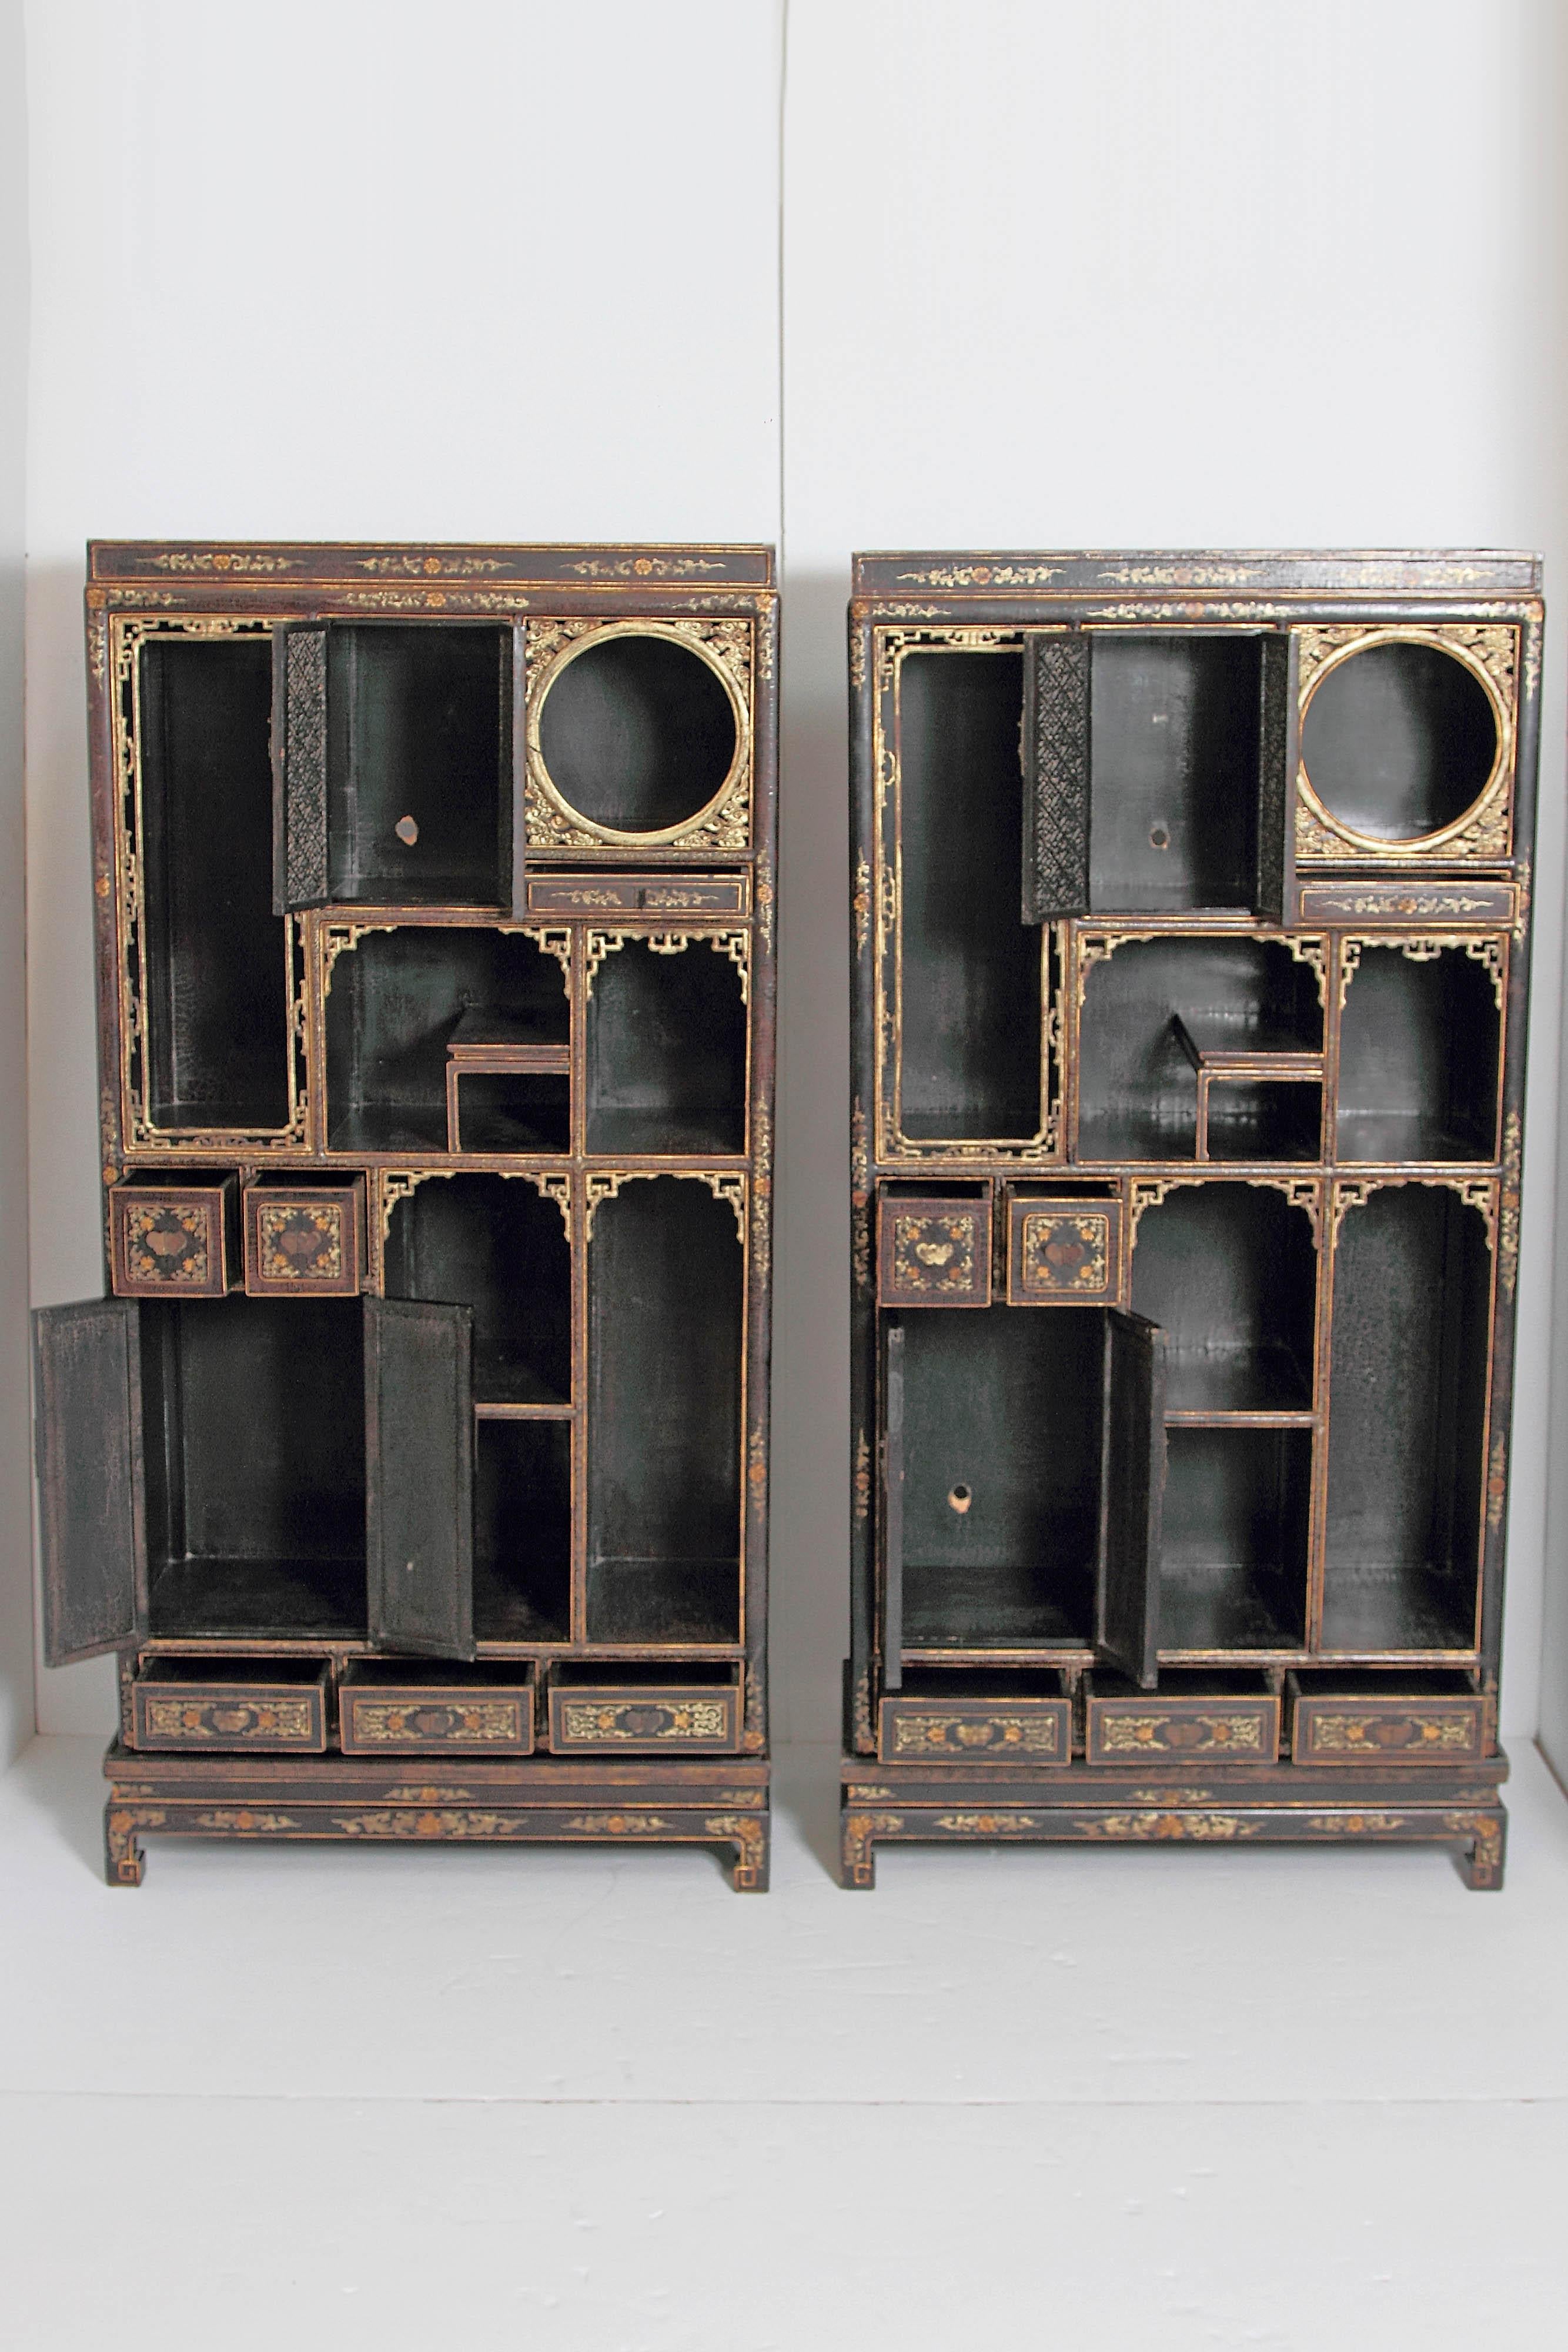 Japanned Pair of Chinese Black Lacquer Display Cabinets